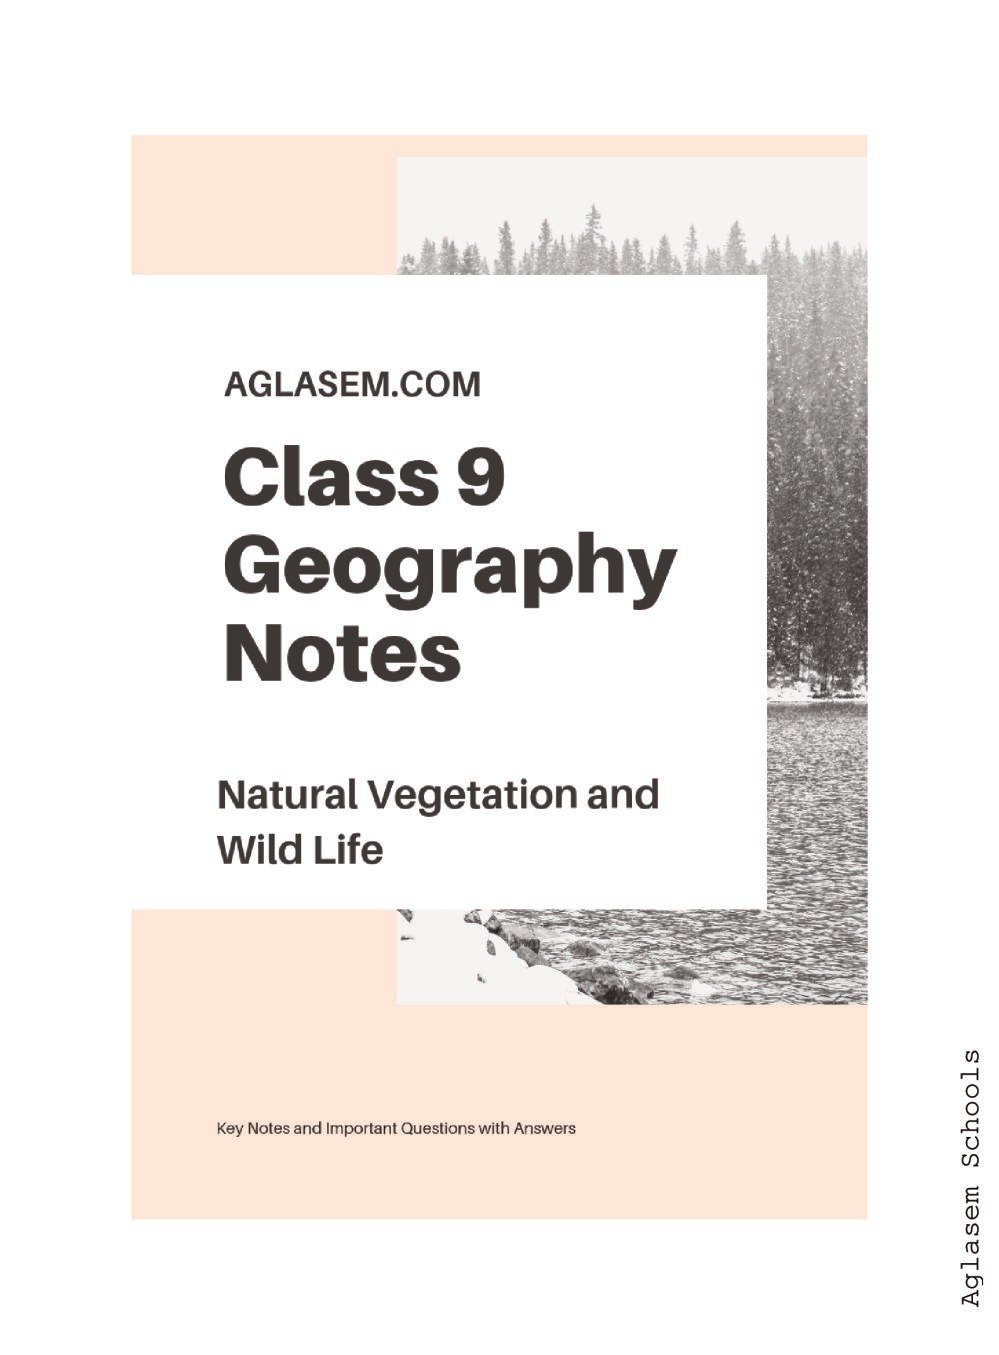 Class 9 Social Science Geography Notes for Natural Vegetation and Wildlife - Page 1